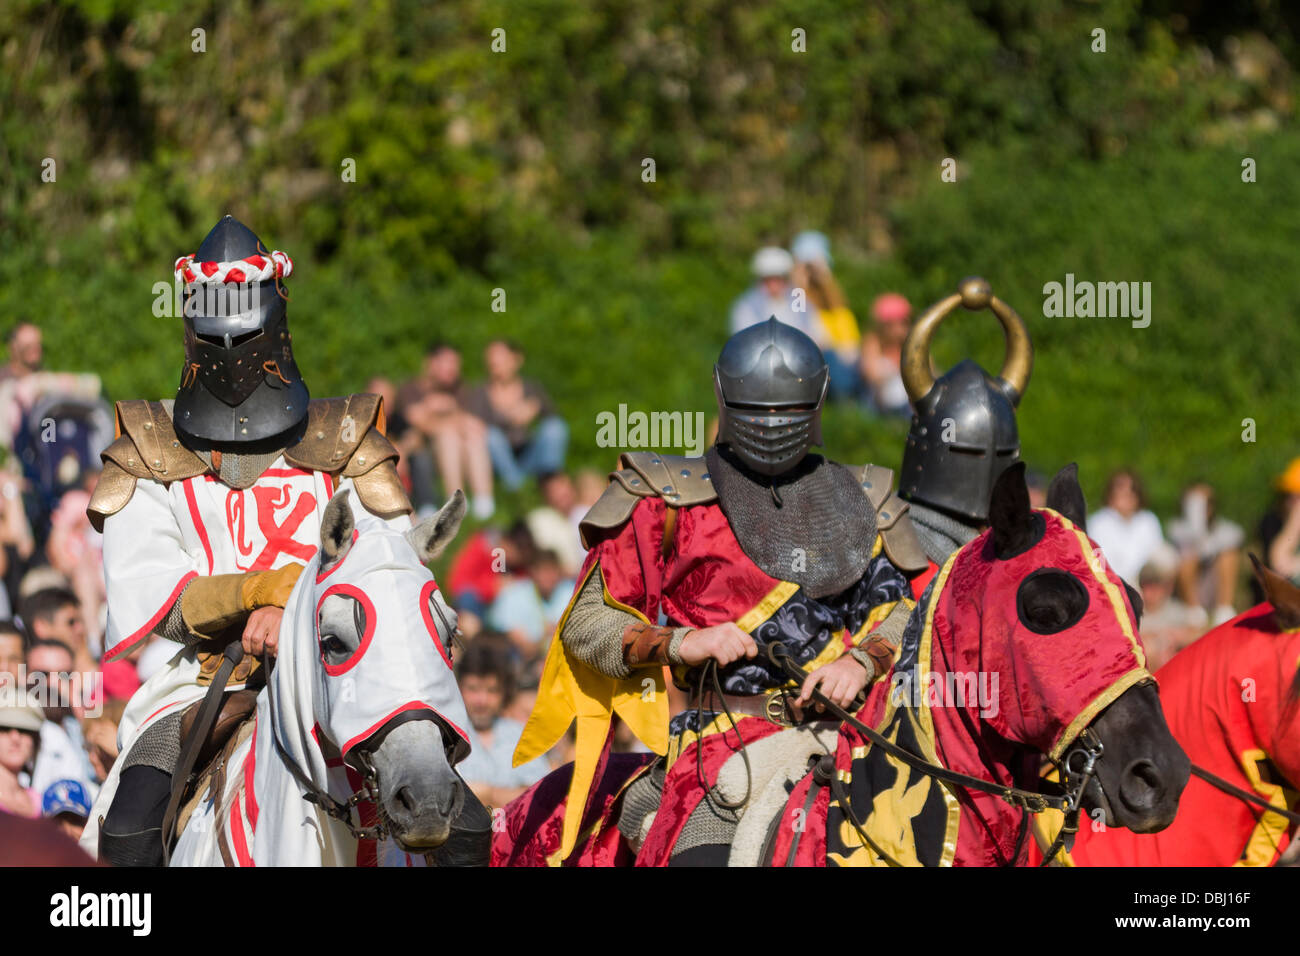 Knights in armour on horseback at French Mediaeval Fayre Stock Photo